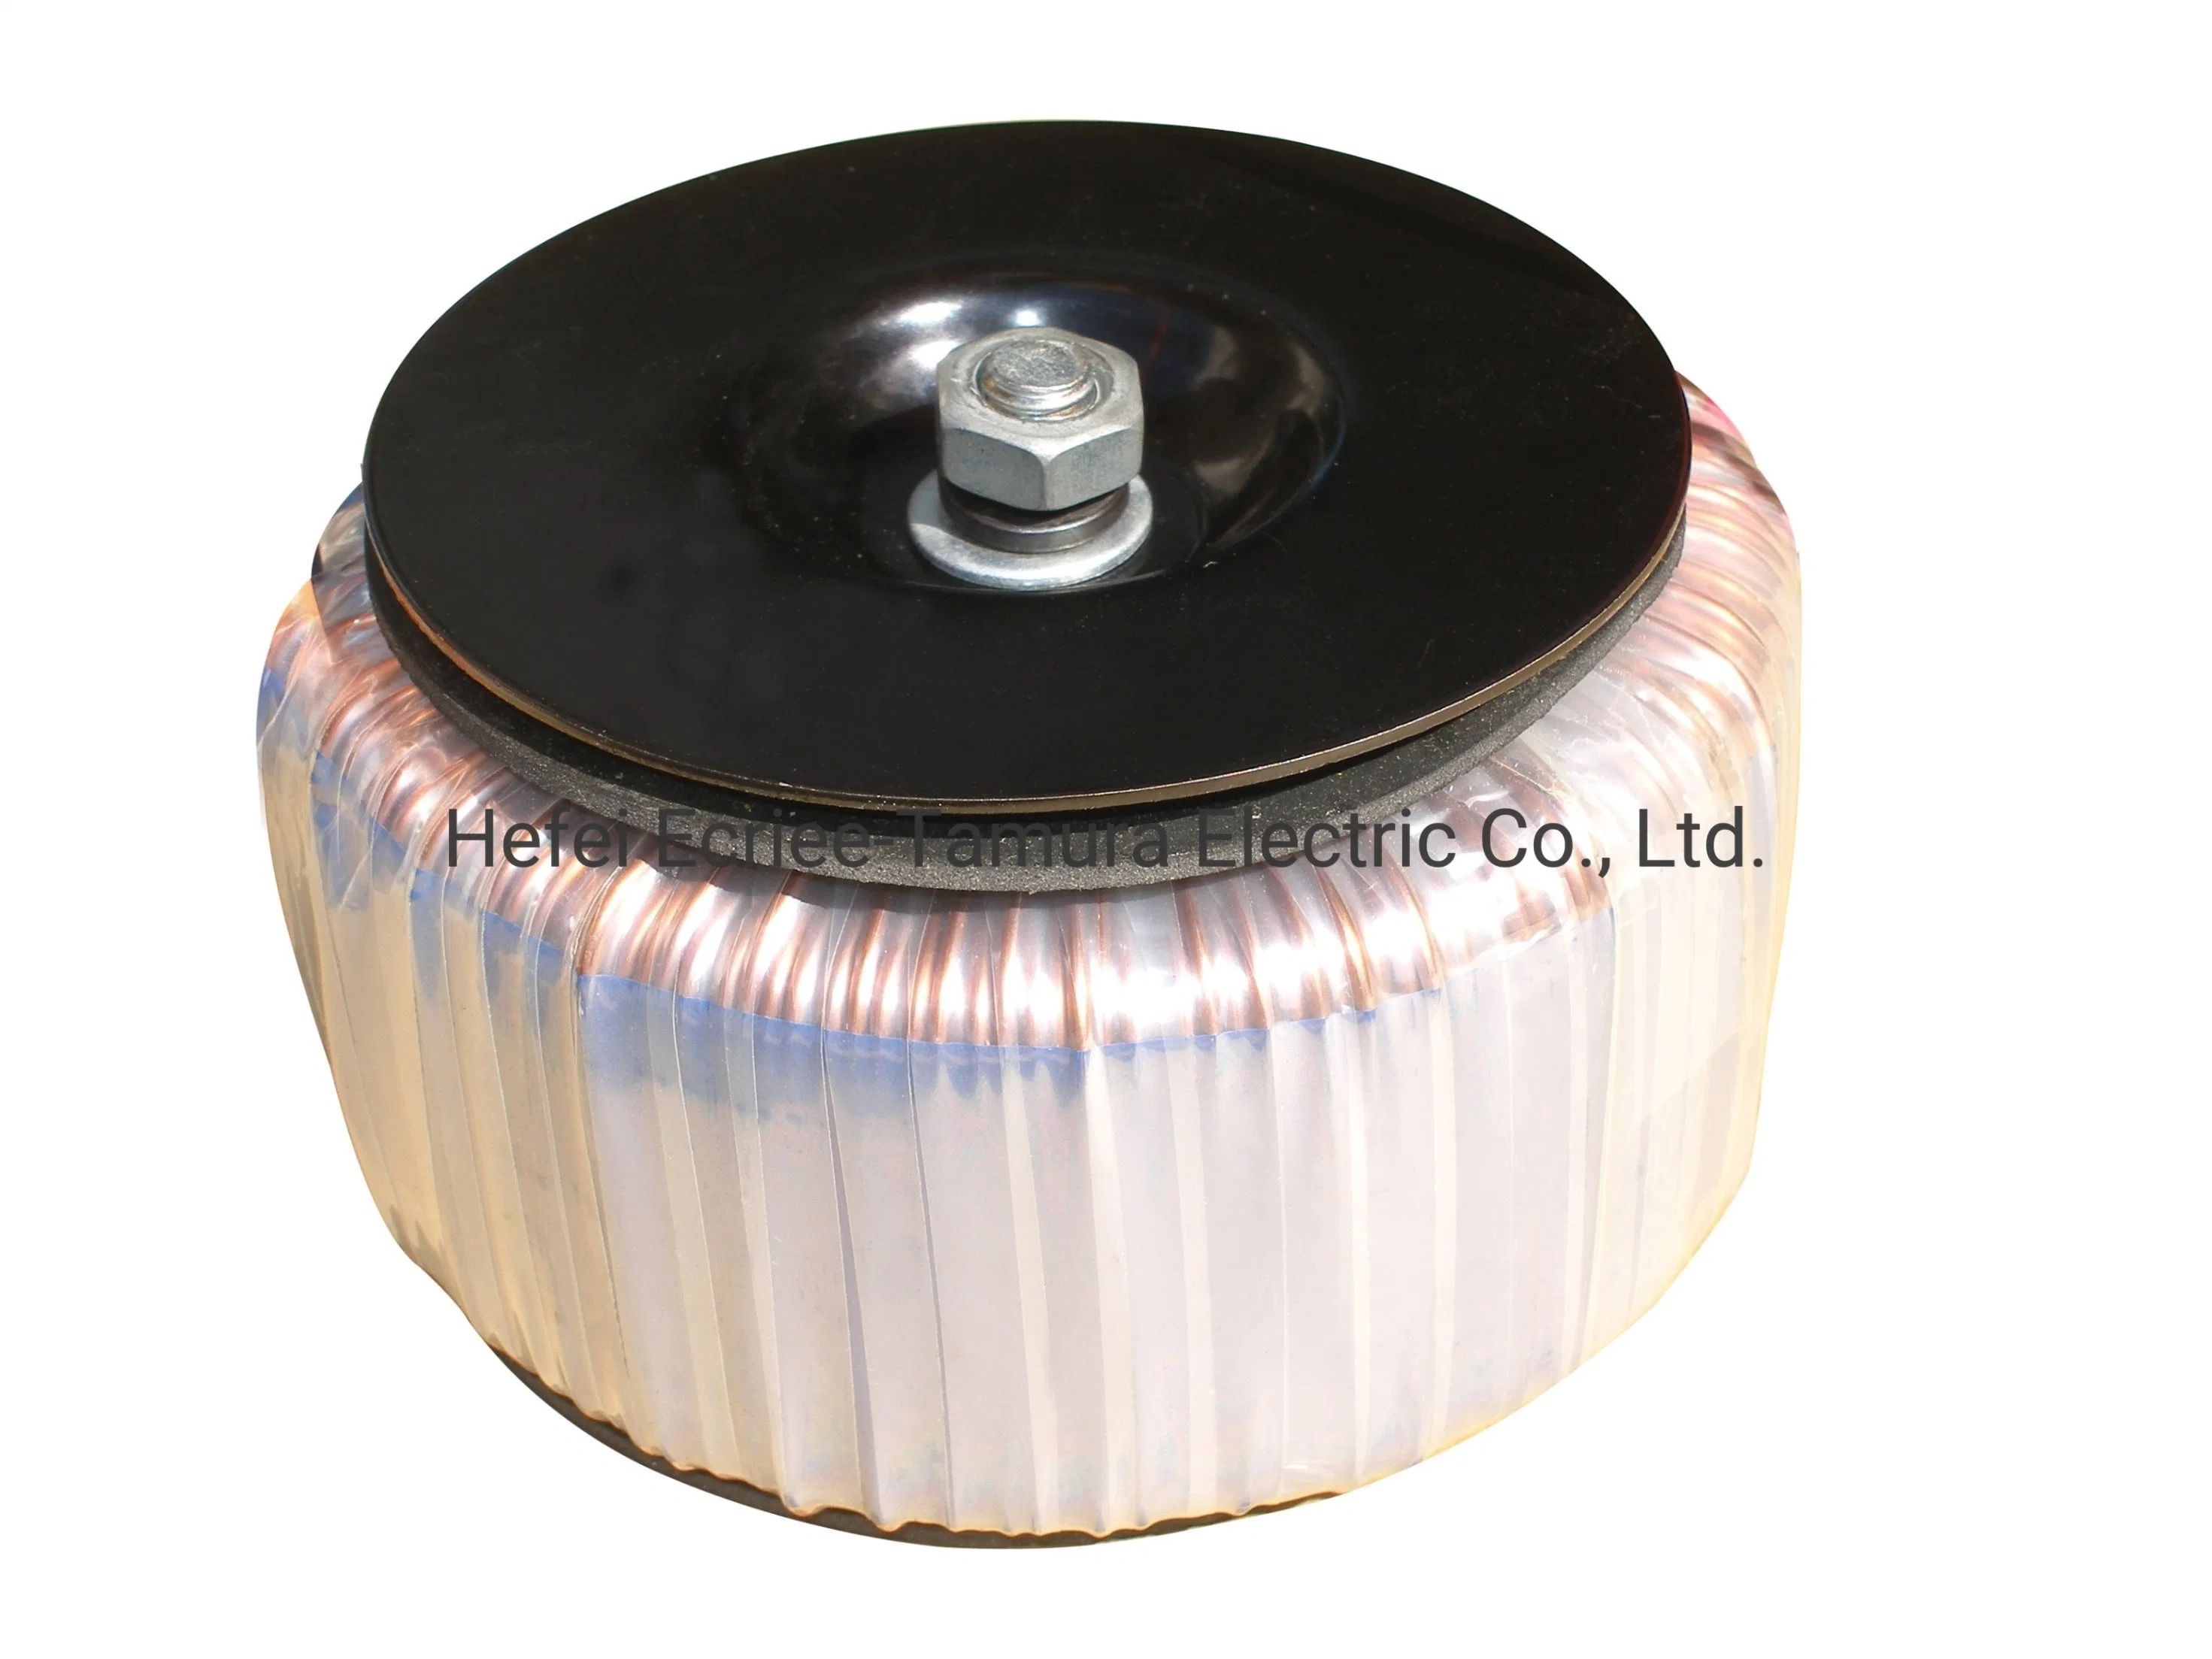 Ecriee-Tamura Toroidal Transformer Is Used to Isolate The Output